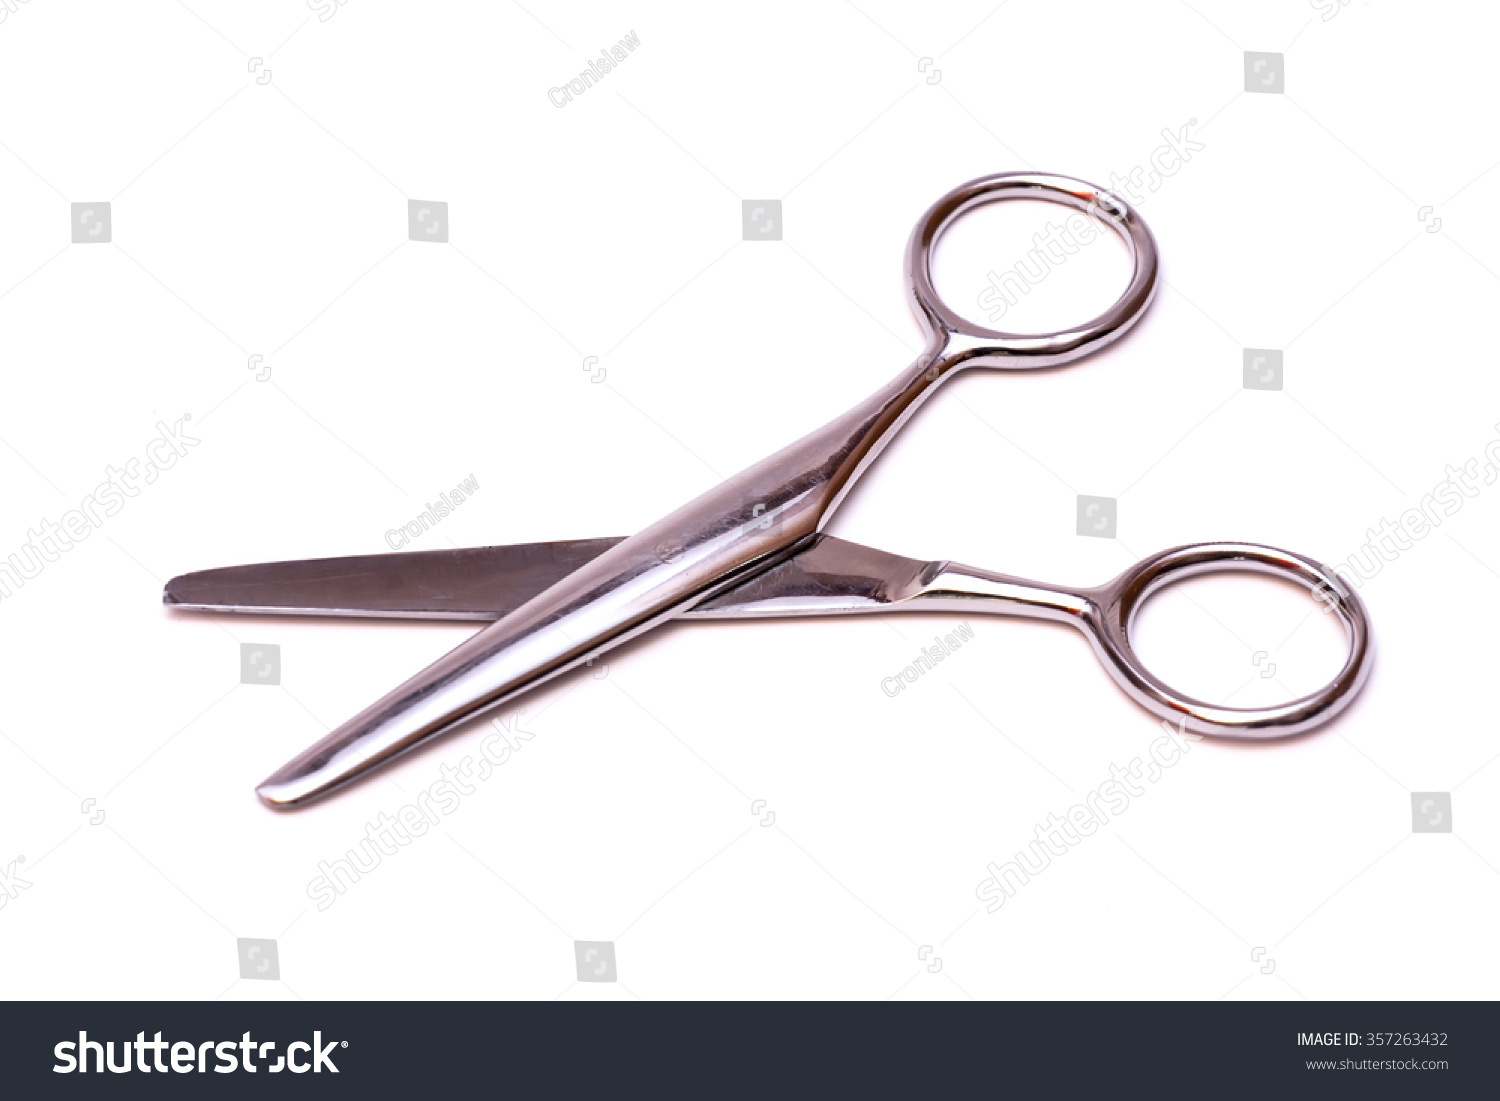 Hairdressers Scissors On White Background Stock Photo Edit Now